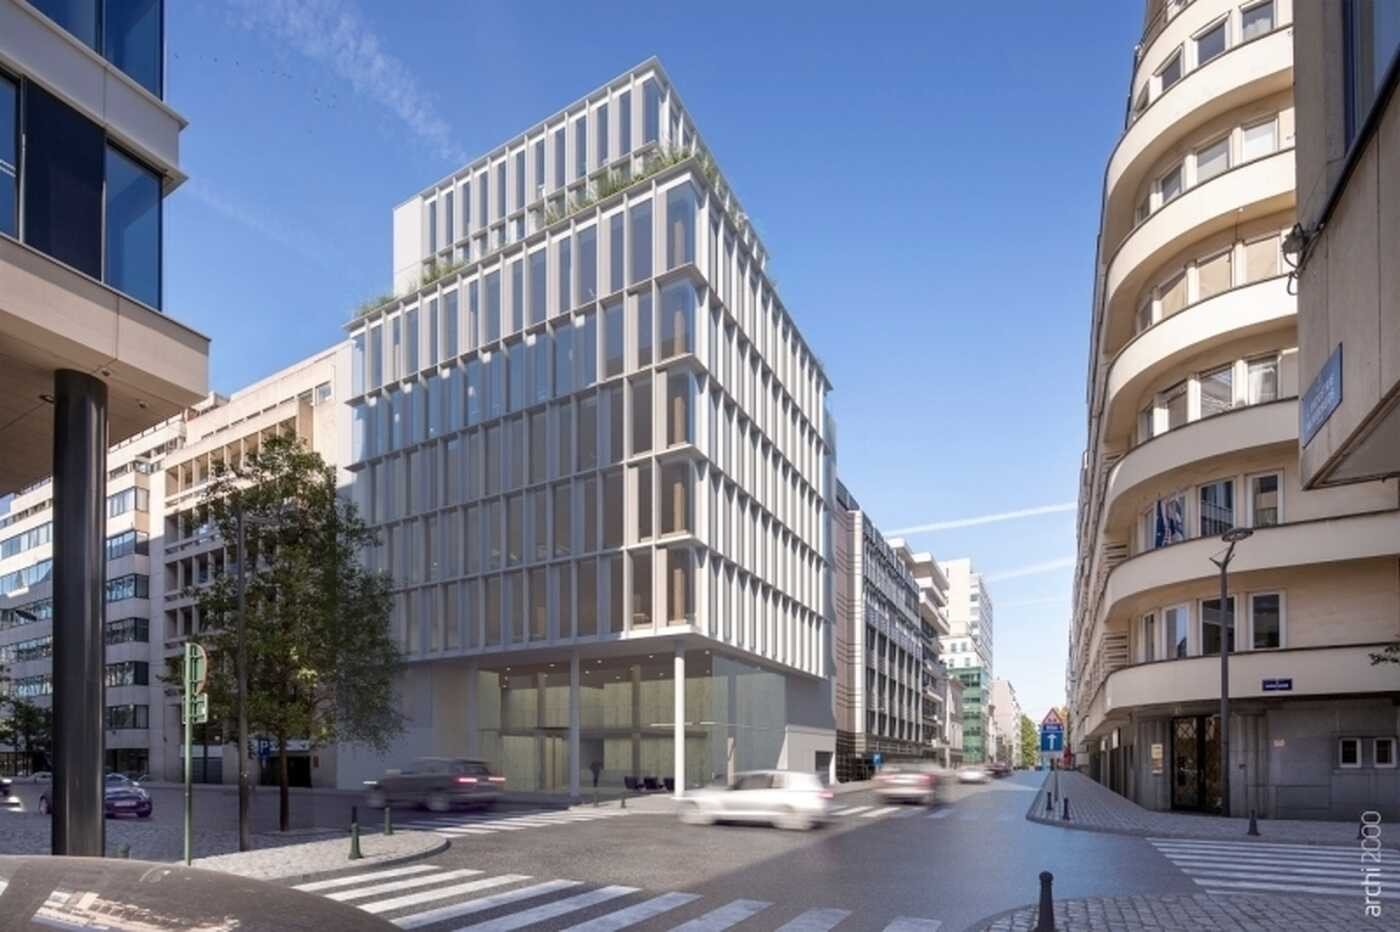 Monteco: The tallest wooden building in Brussels